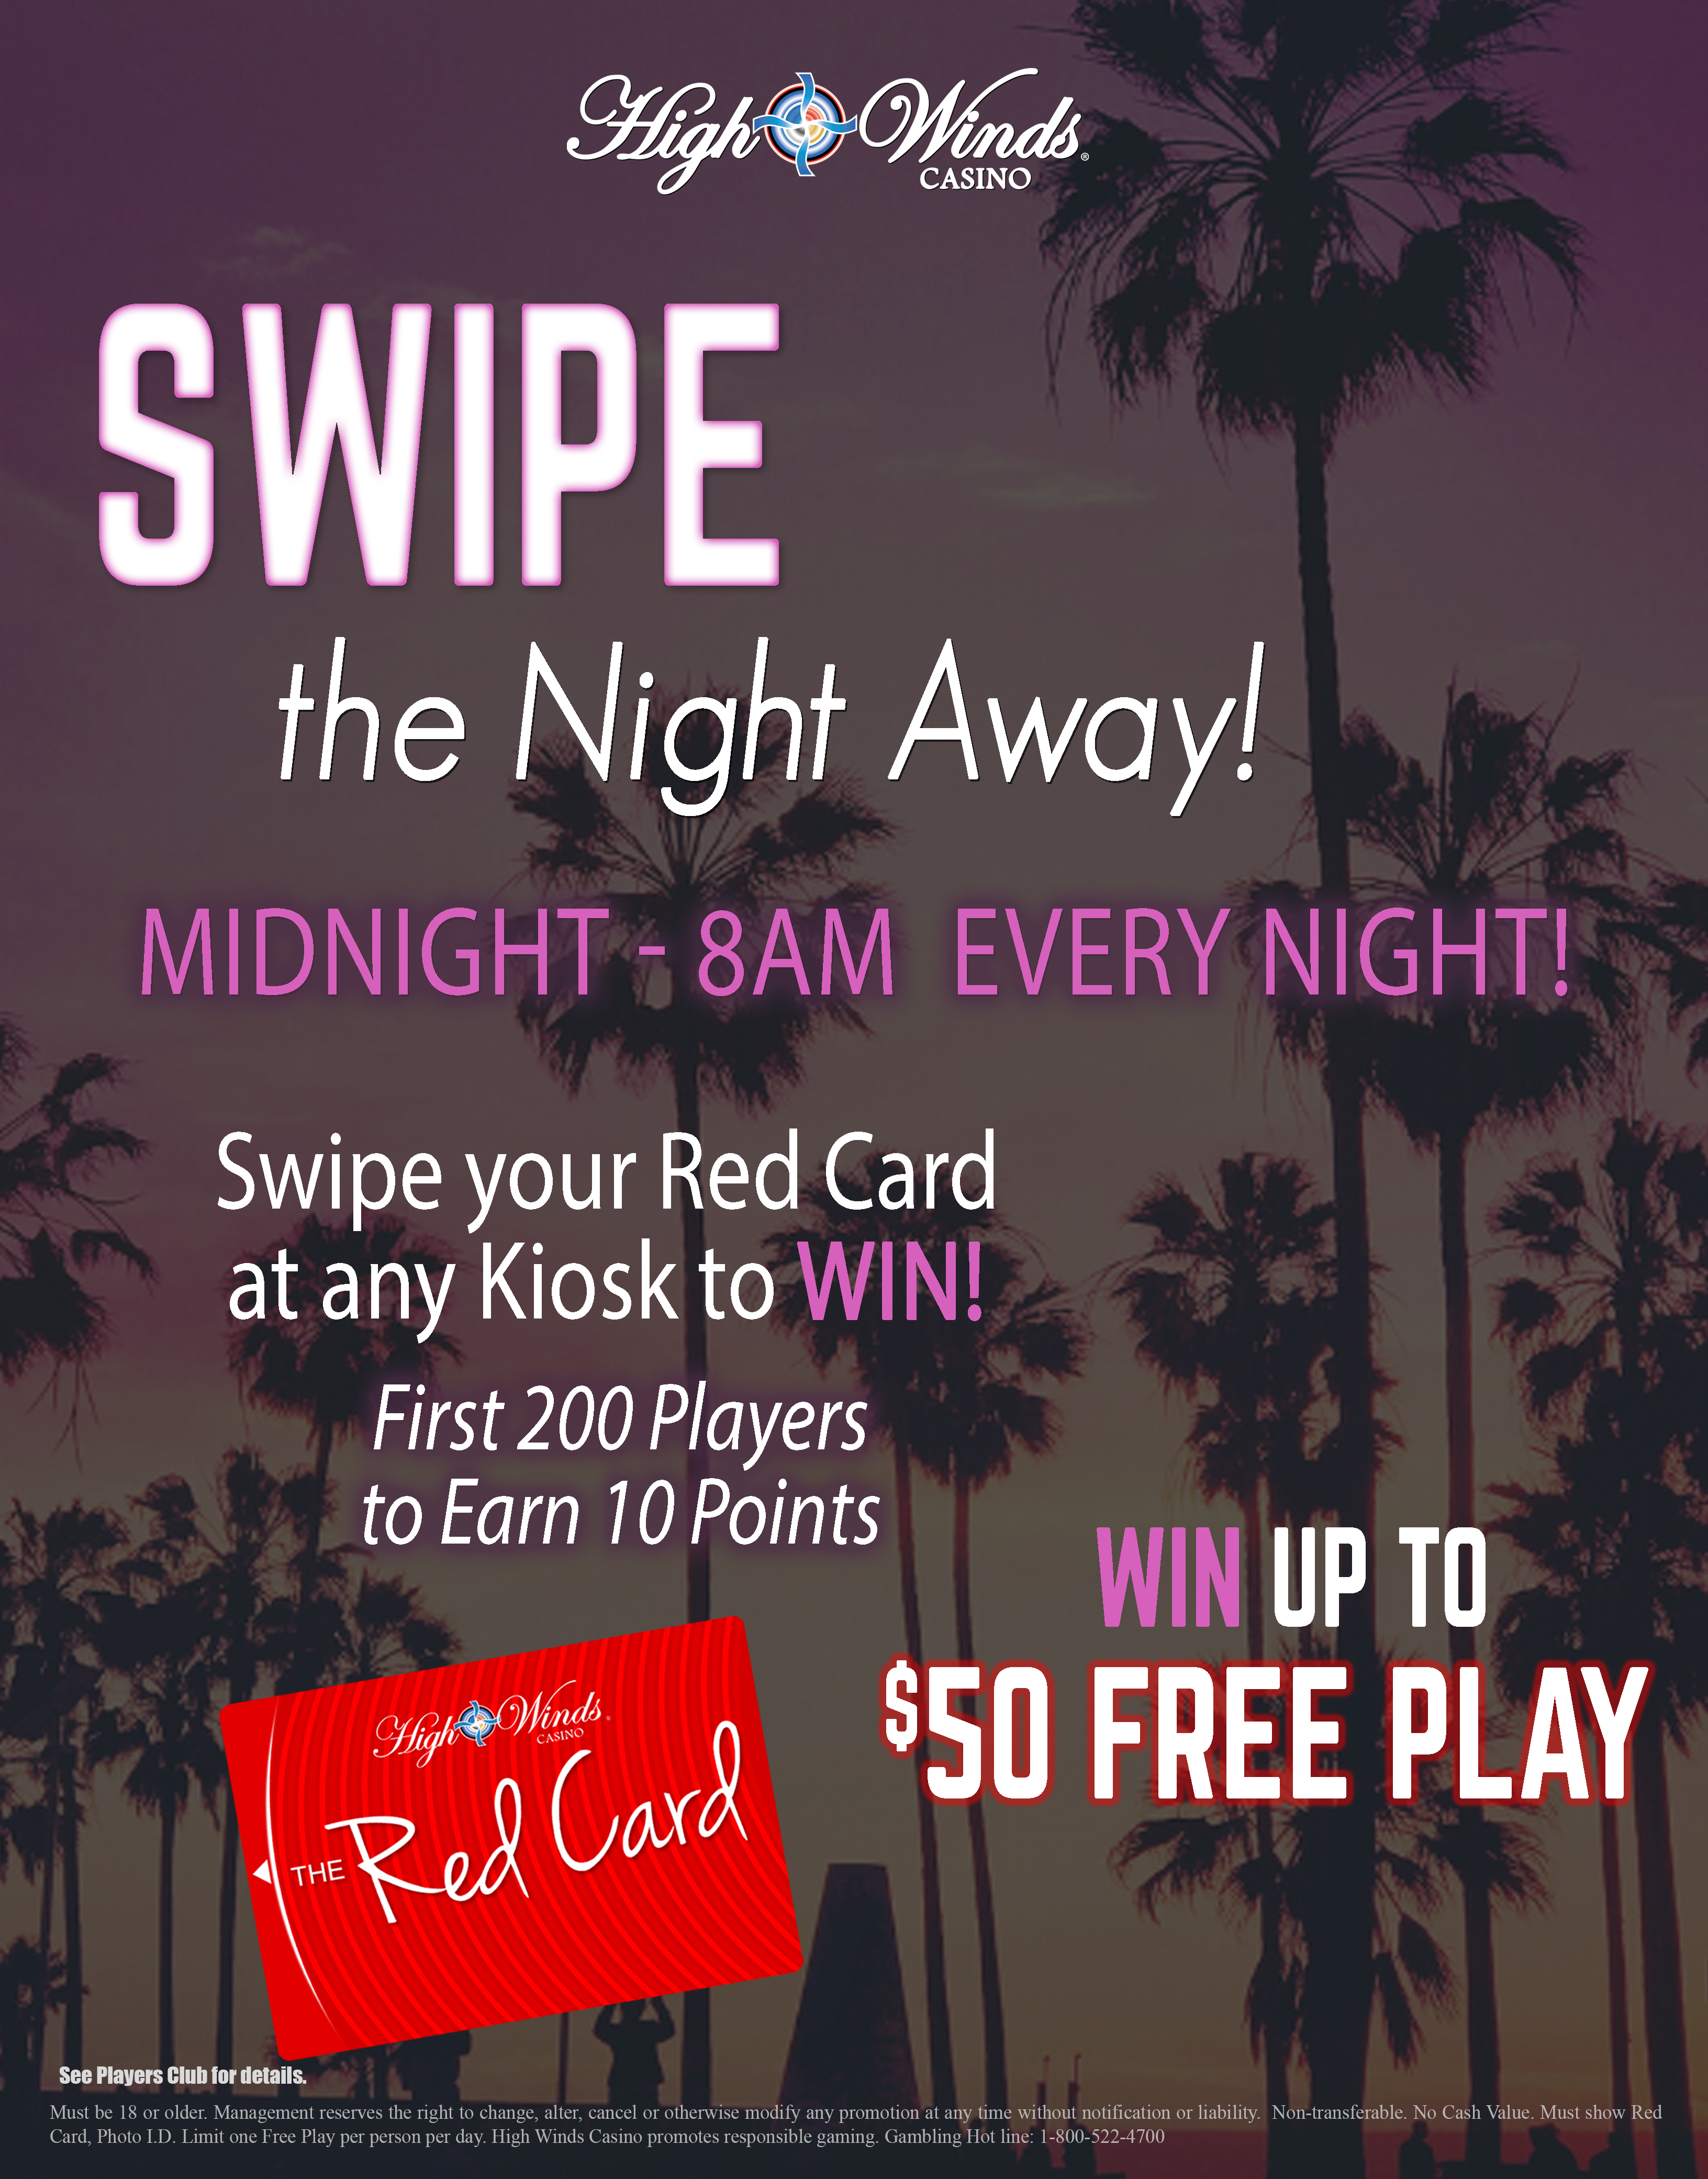 Swipe the Night Away 12am - 8am Win up to $50 in Free Play 